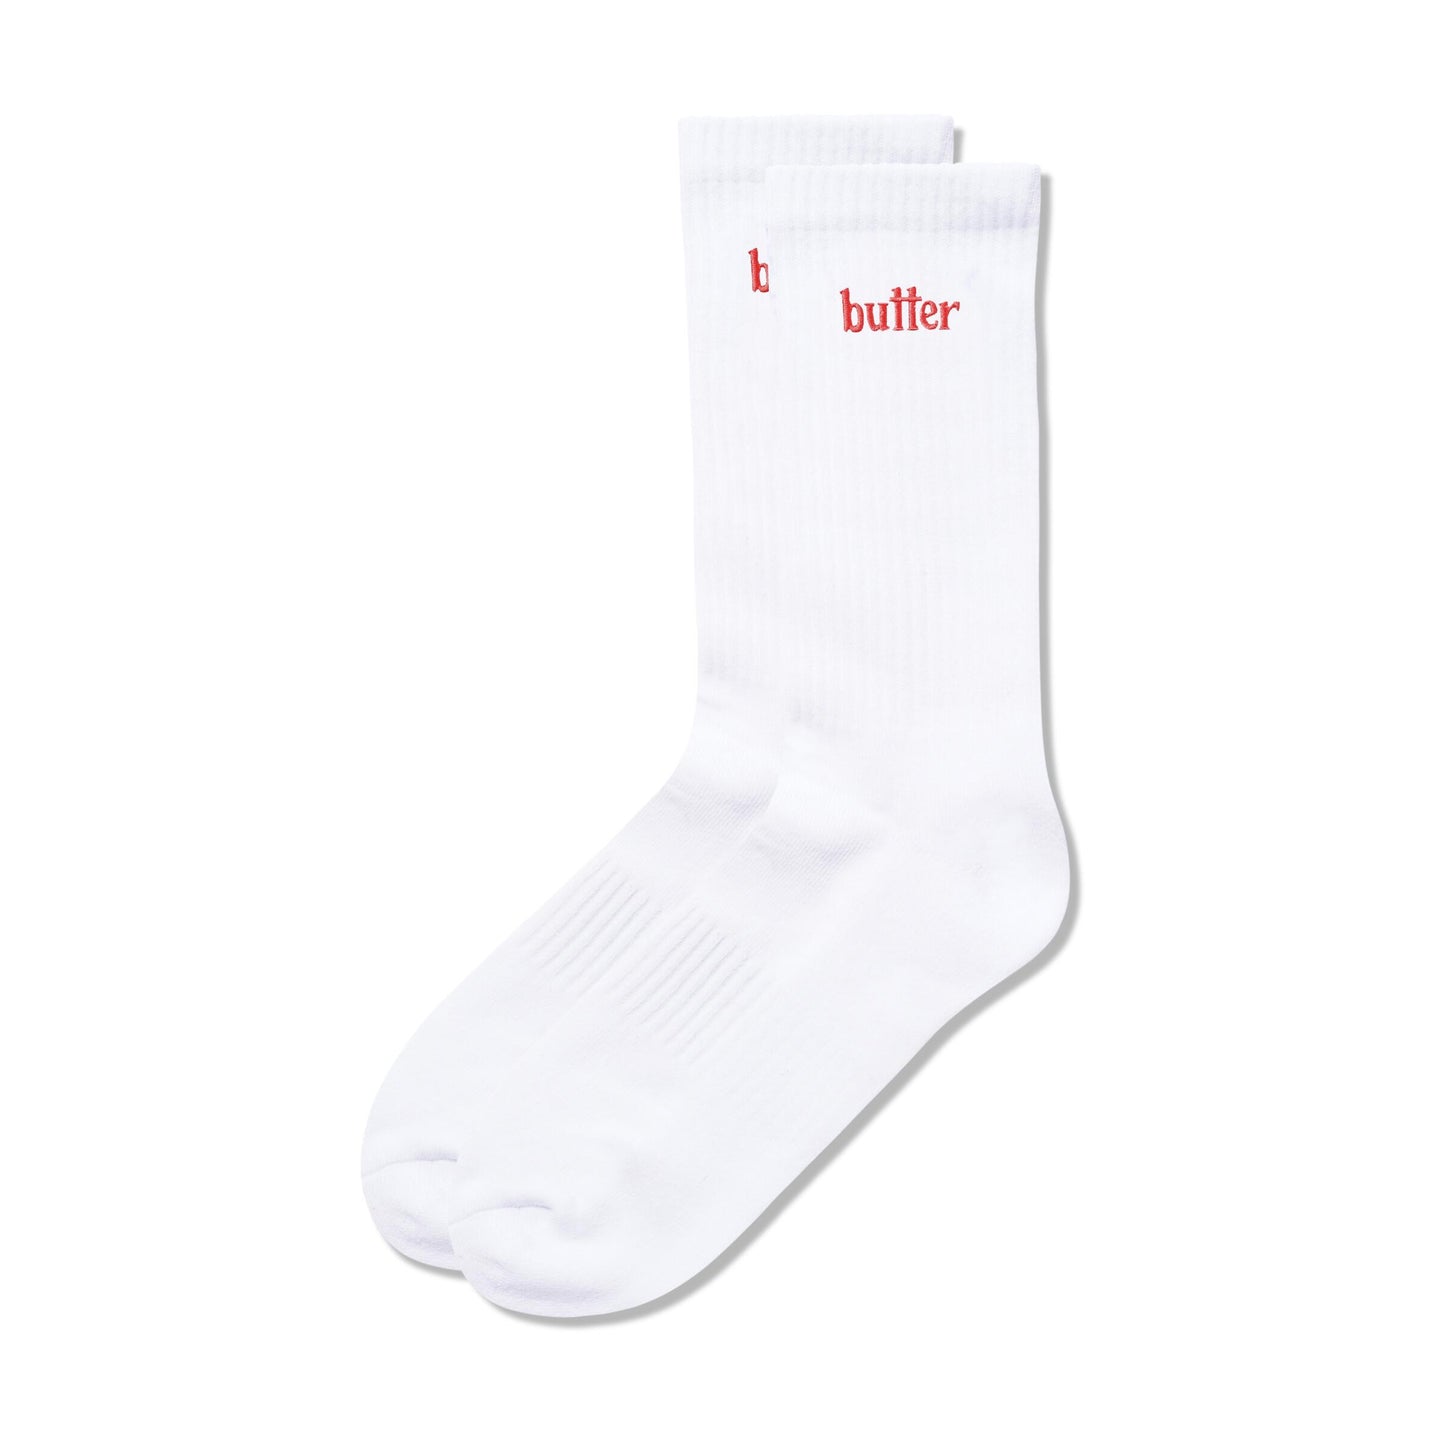 Butter Basic Socks SU'24: Assorted Colors